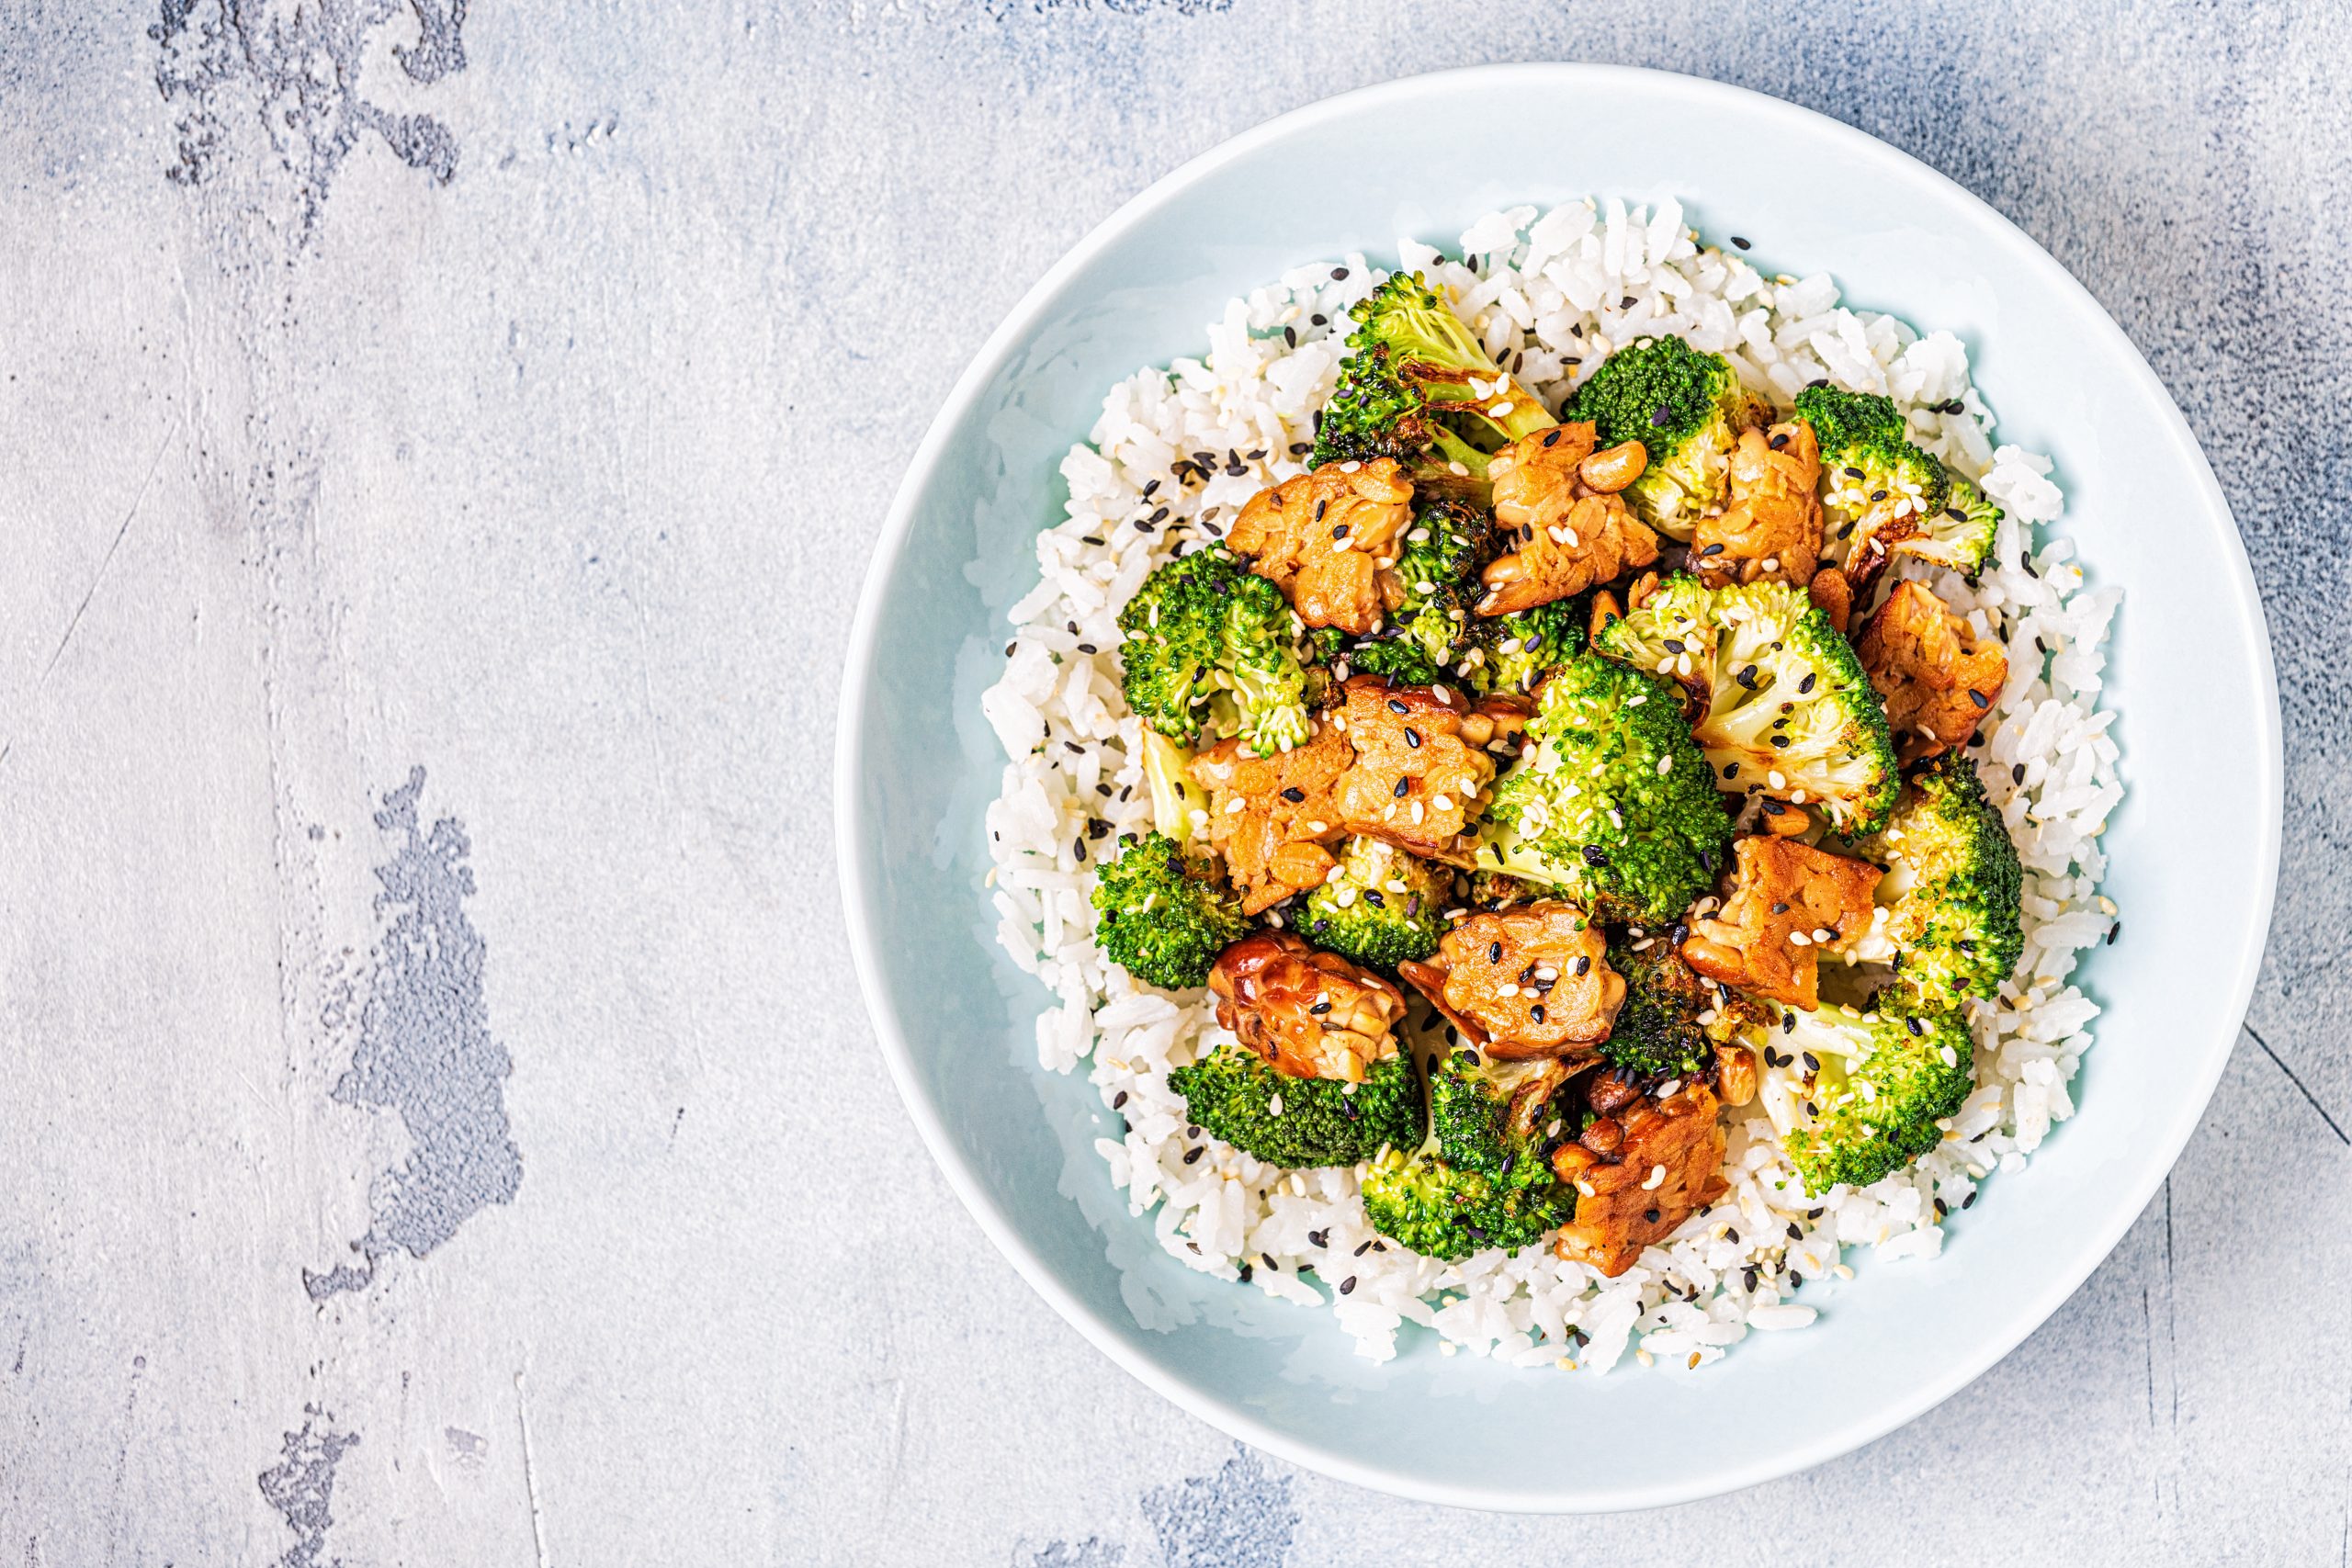 A round dish of fried tempeh and broccoli on a bed of white rice